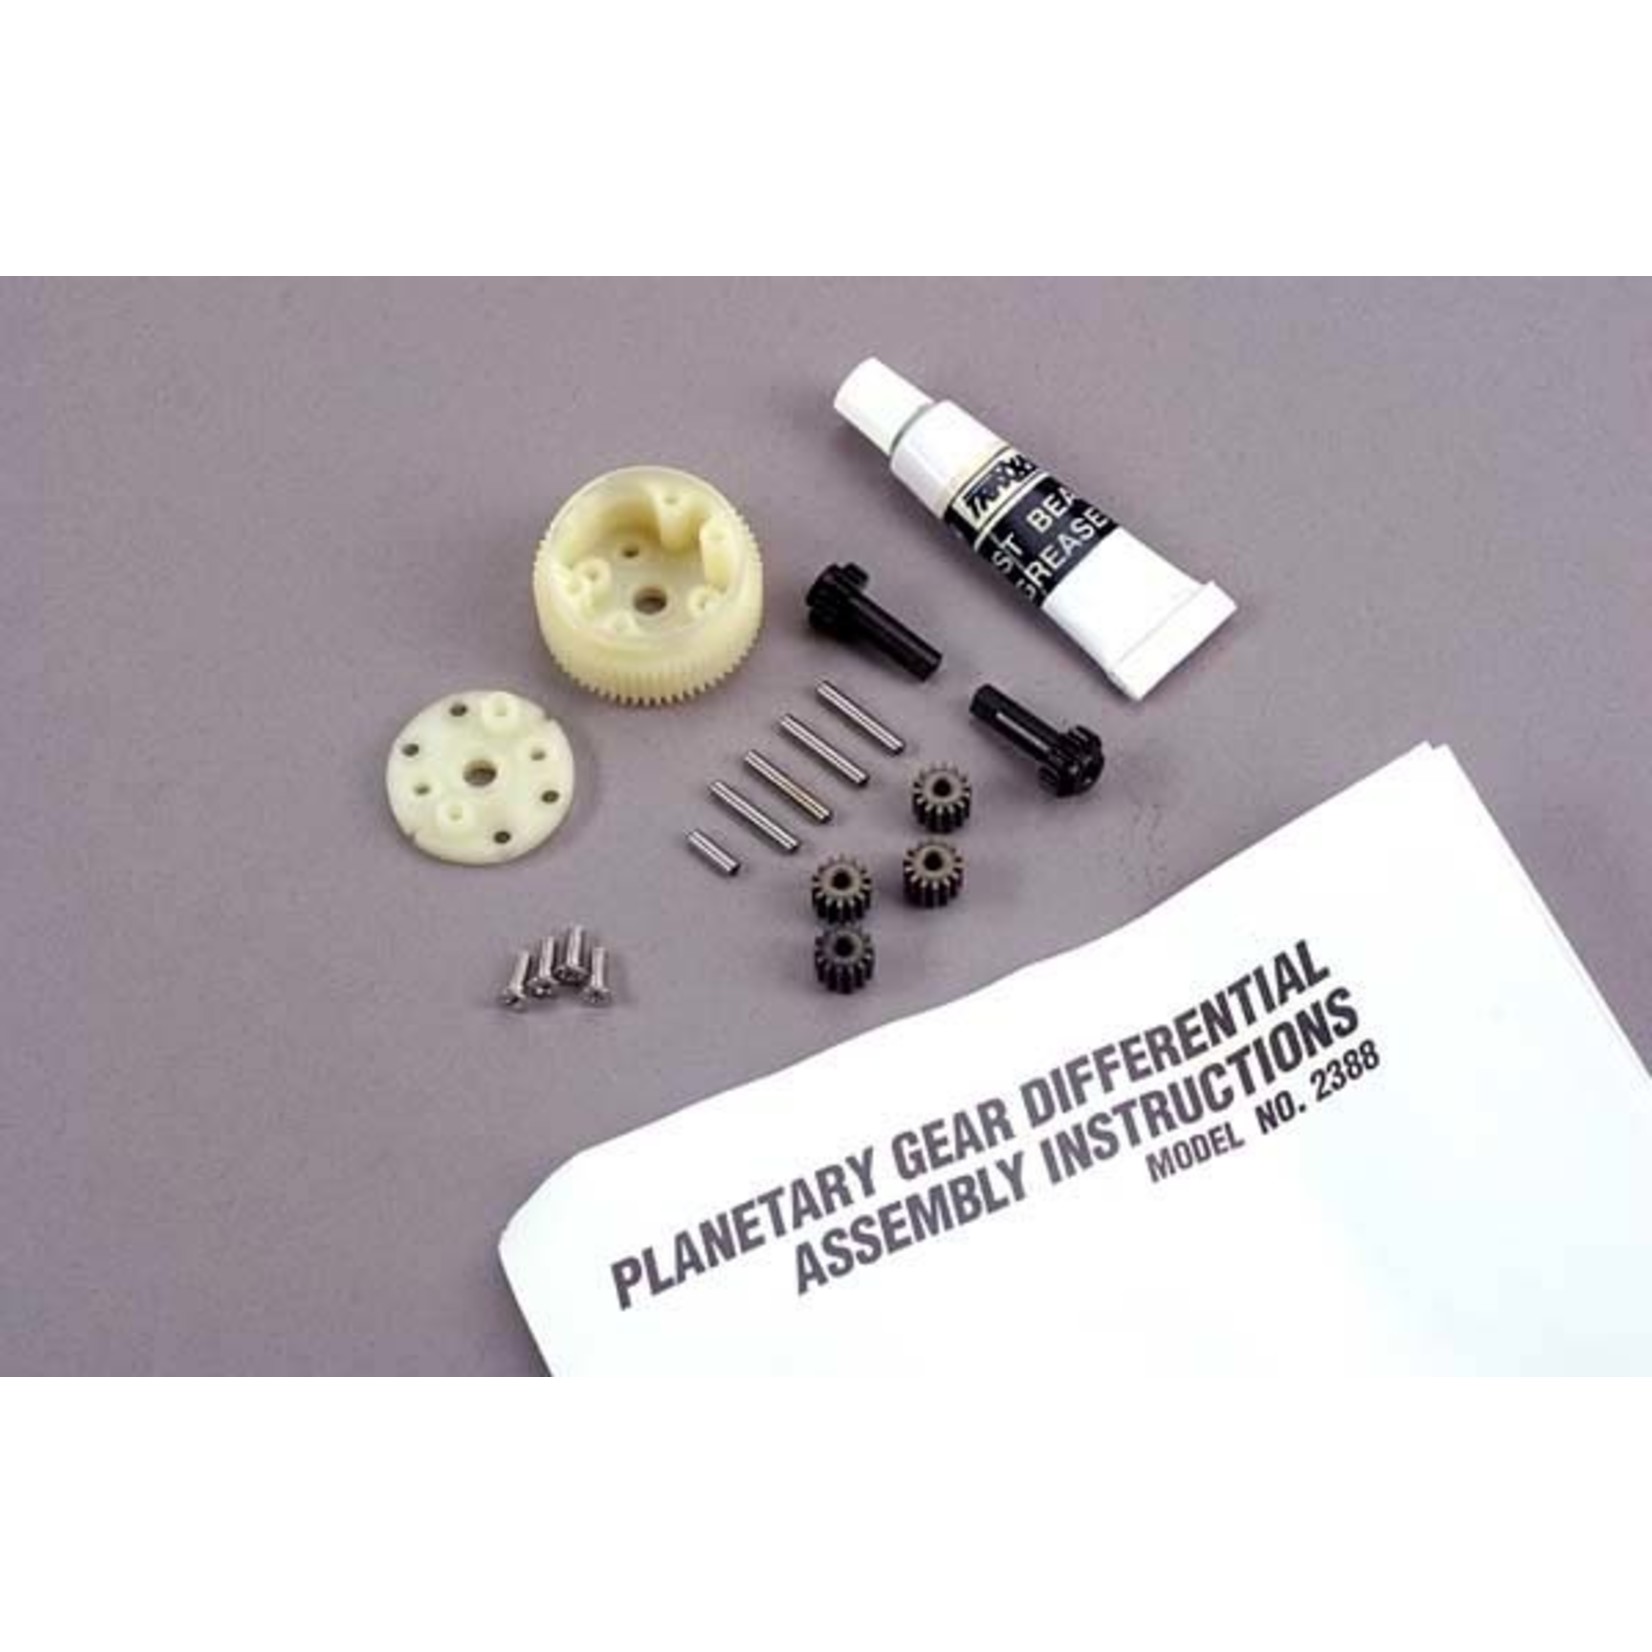 Traxxas 2388 - Planetary gear differential (complete)